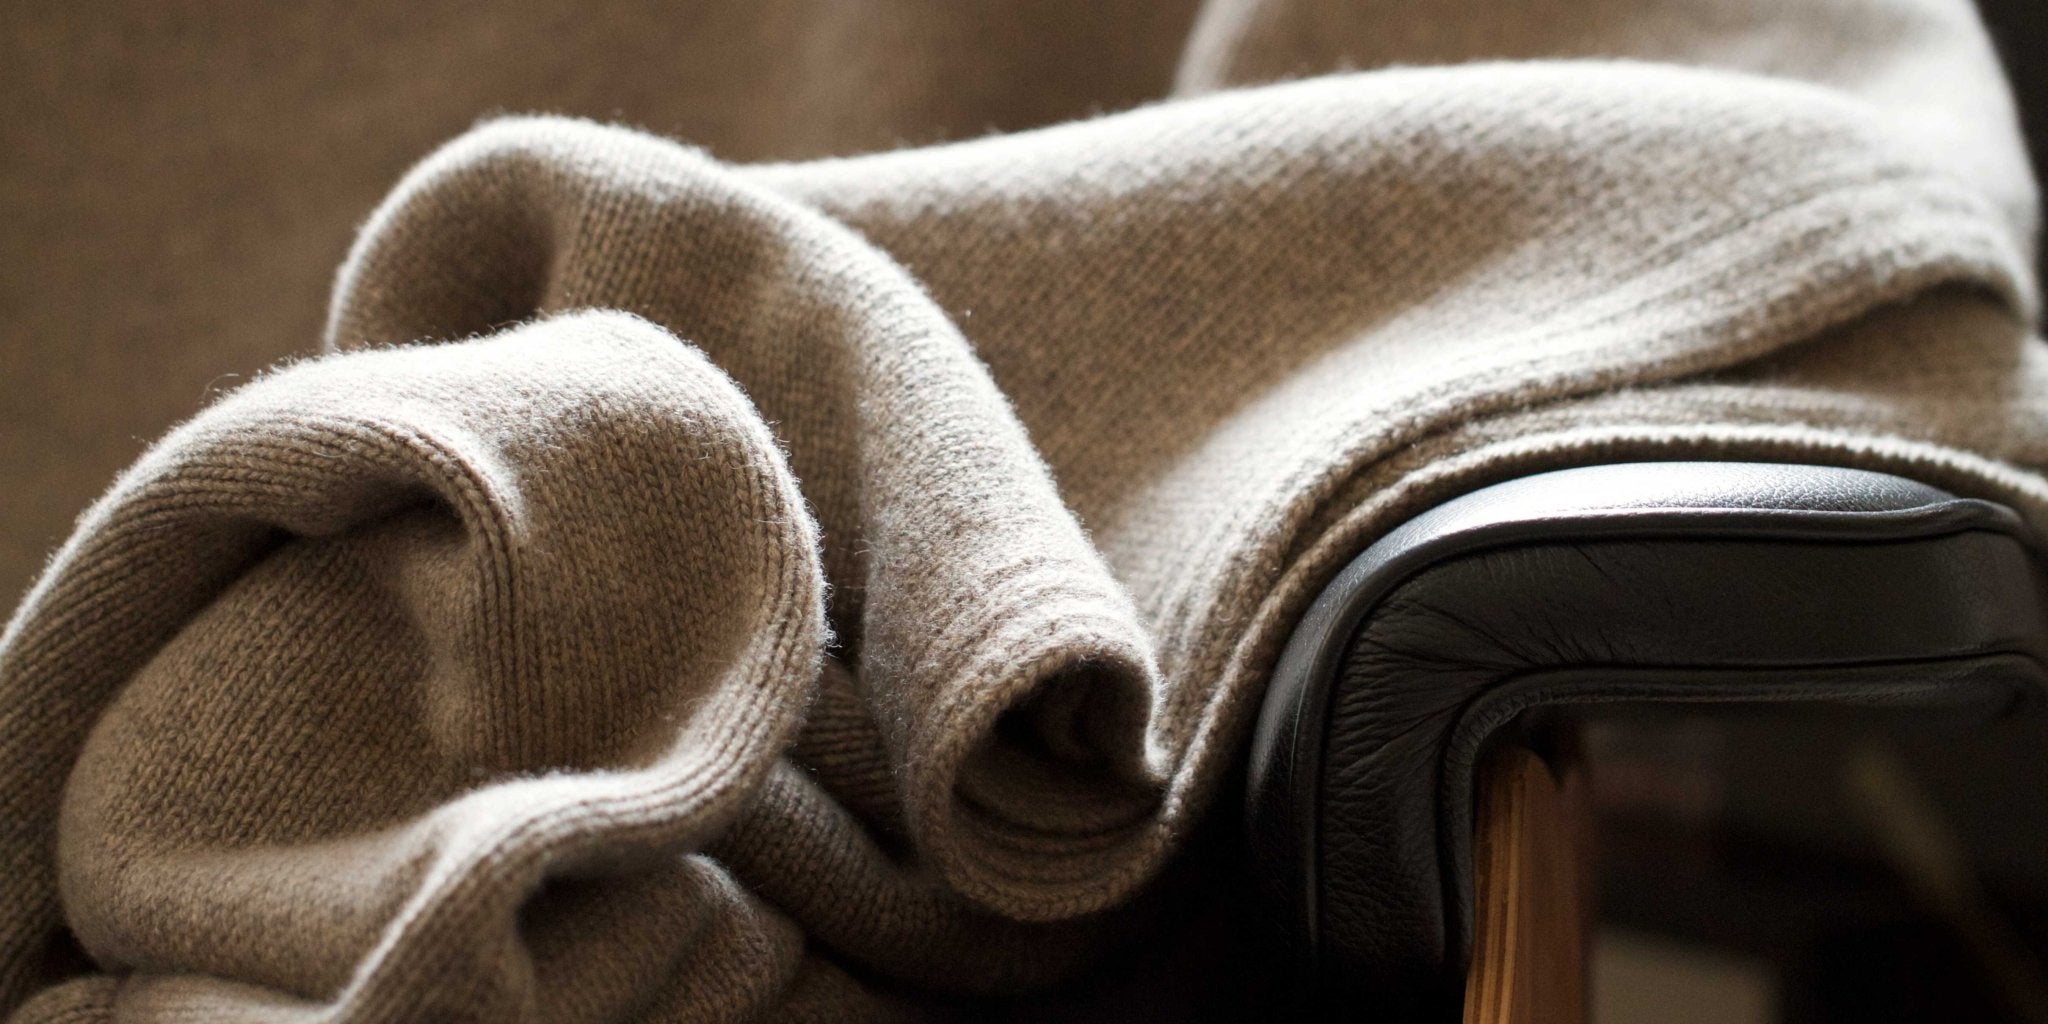 Repairing cashmere is a good investment - Cashmere Circle